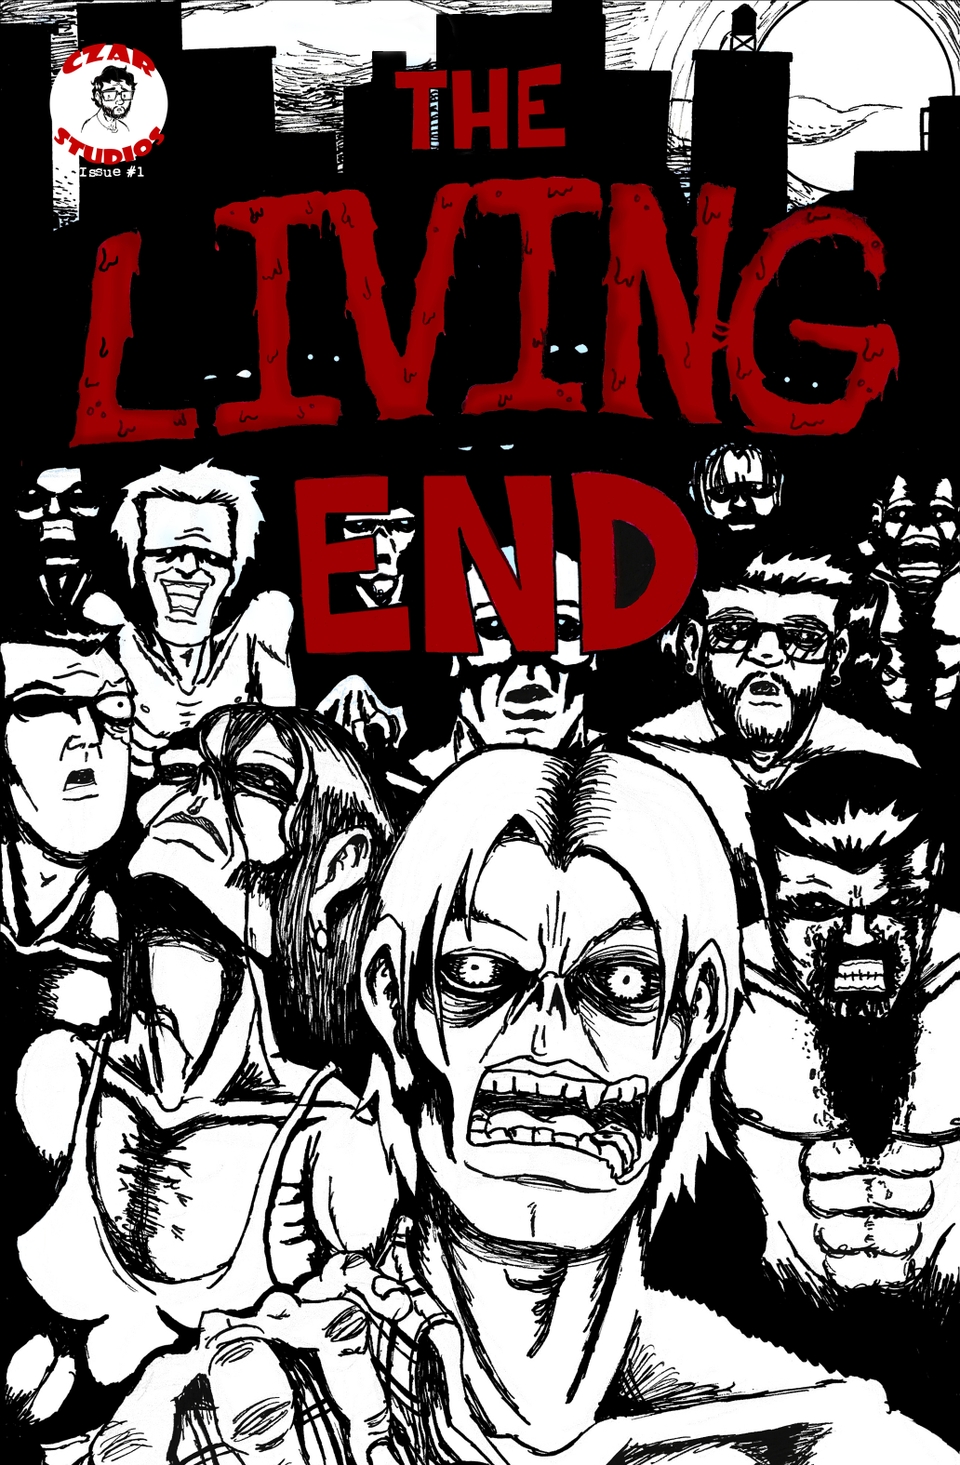 ***New Comic: The Lving End***